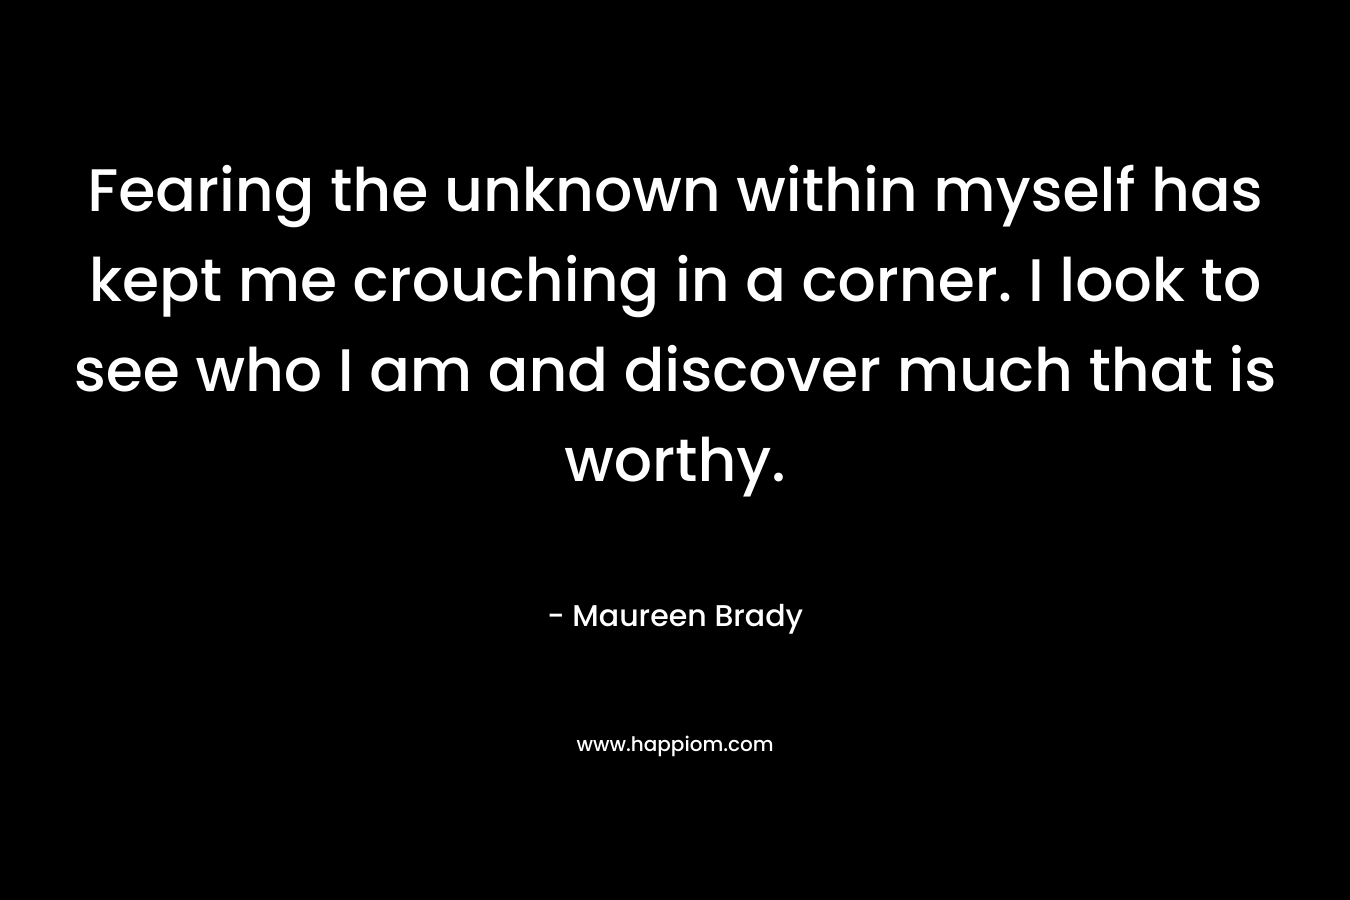 Fearing the unknown within myself has kept me crouching in a corner. I look to see who I am and discover much that is worthy.